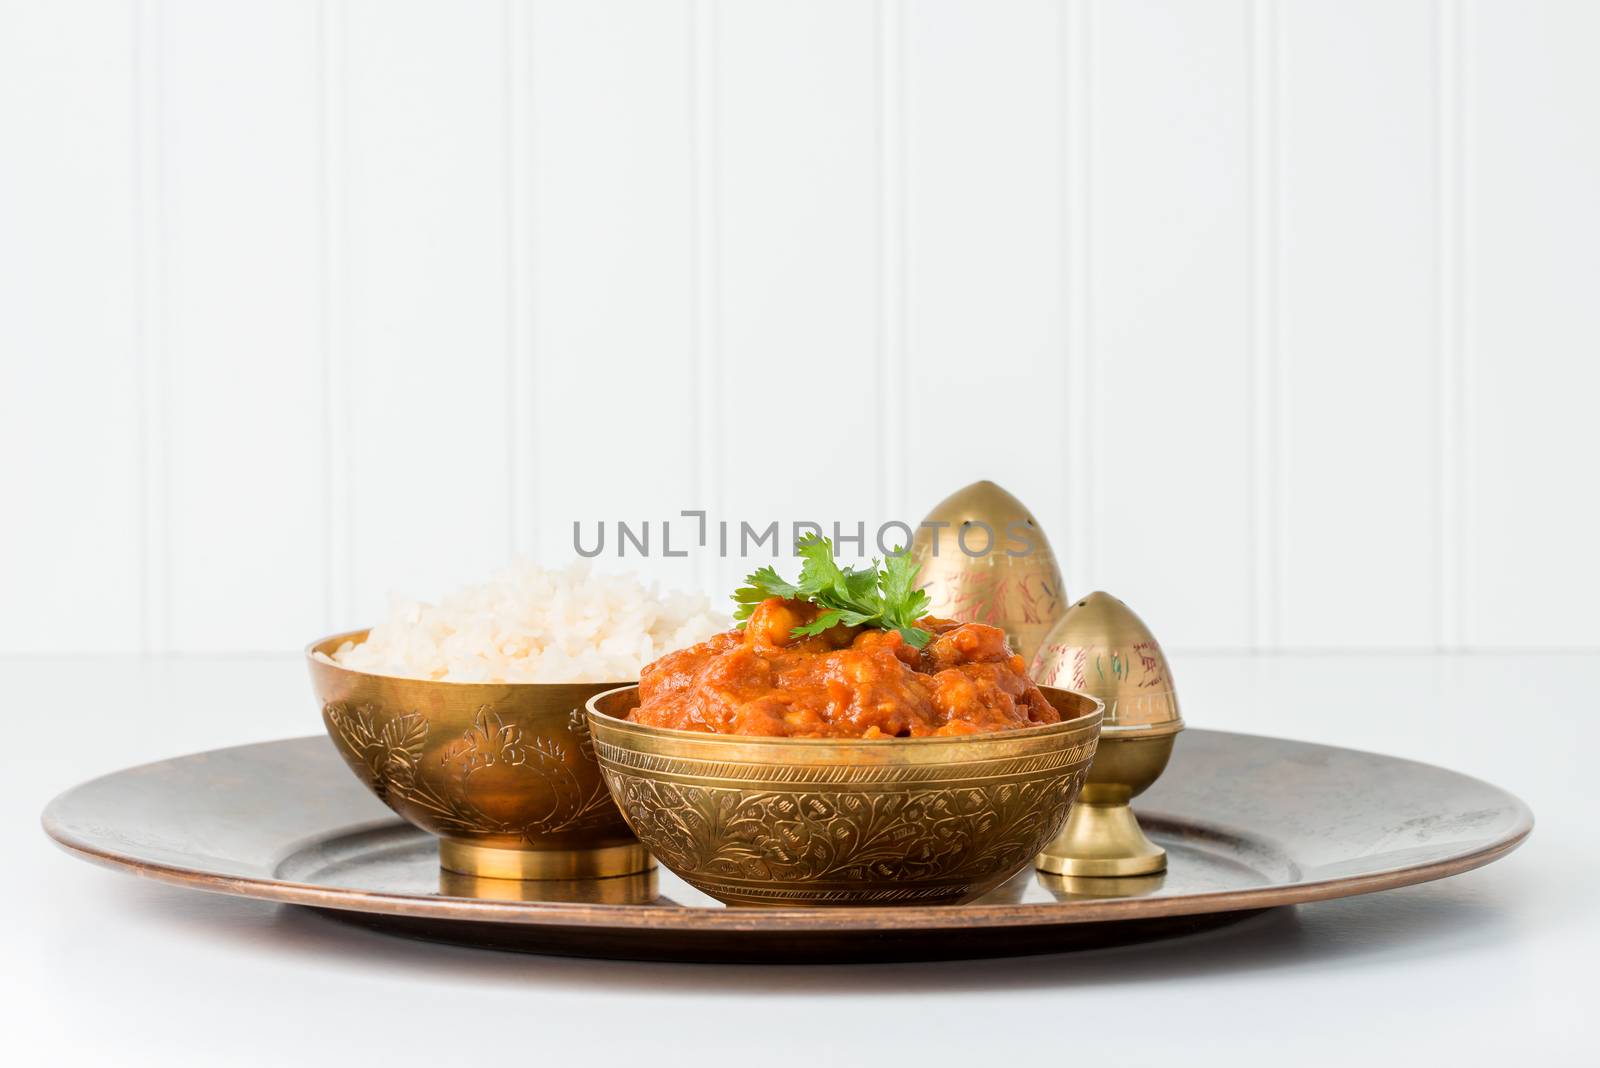 Chana Masala and Rice by billberryphotography